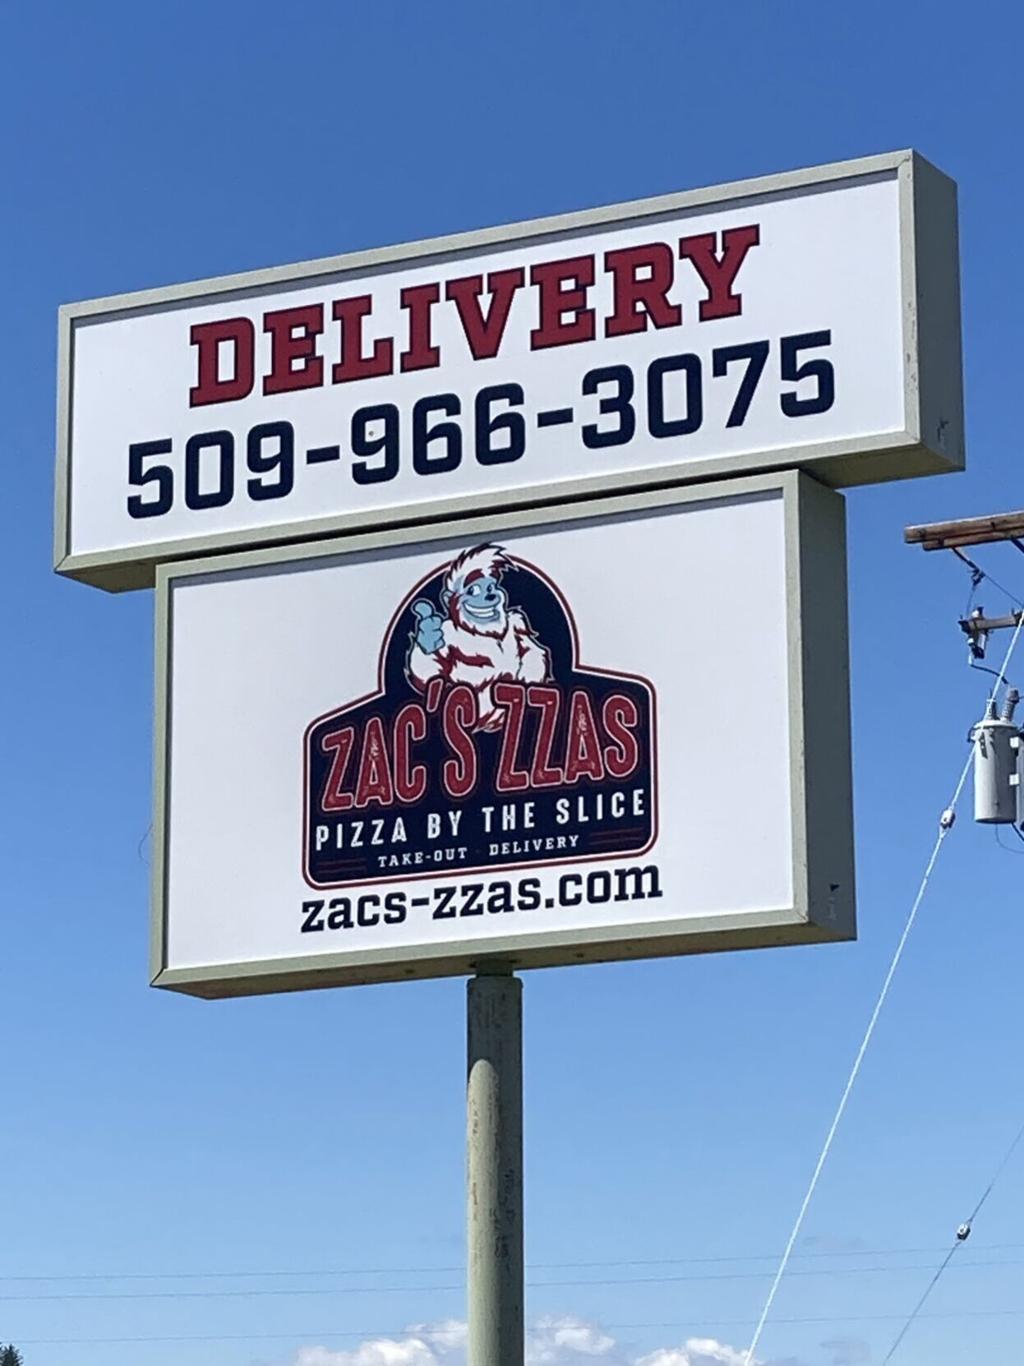 I'm Glad They Opened a New Pizza Restaurant in West Valley, Washington